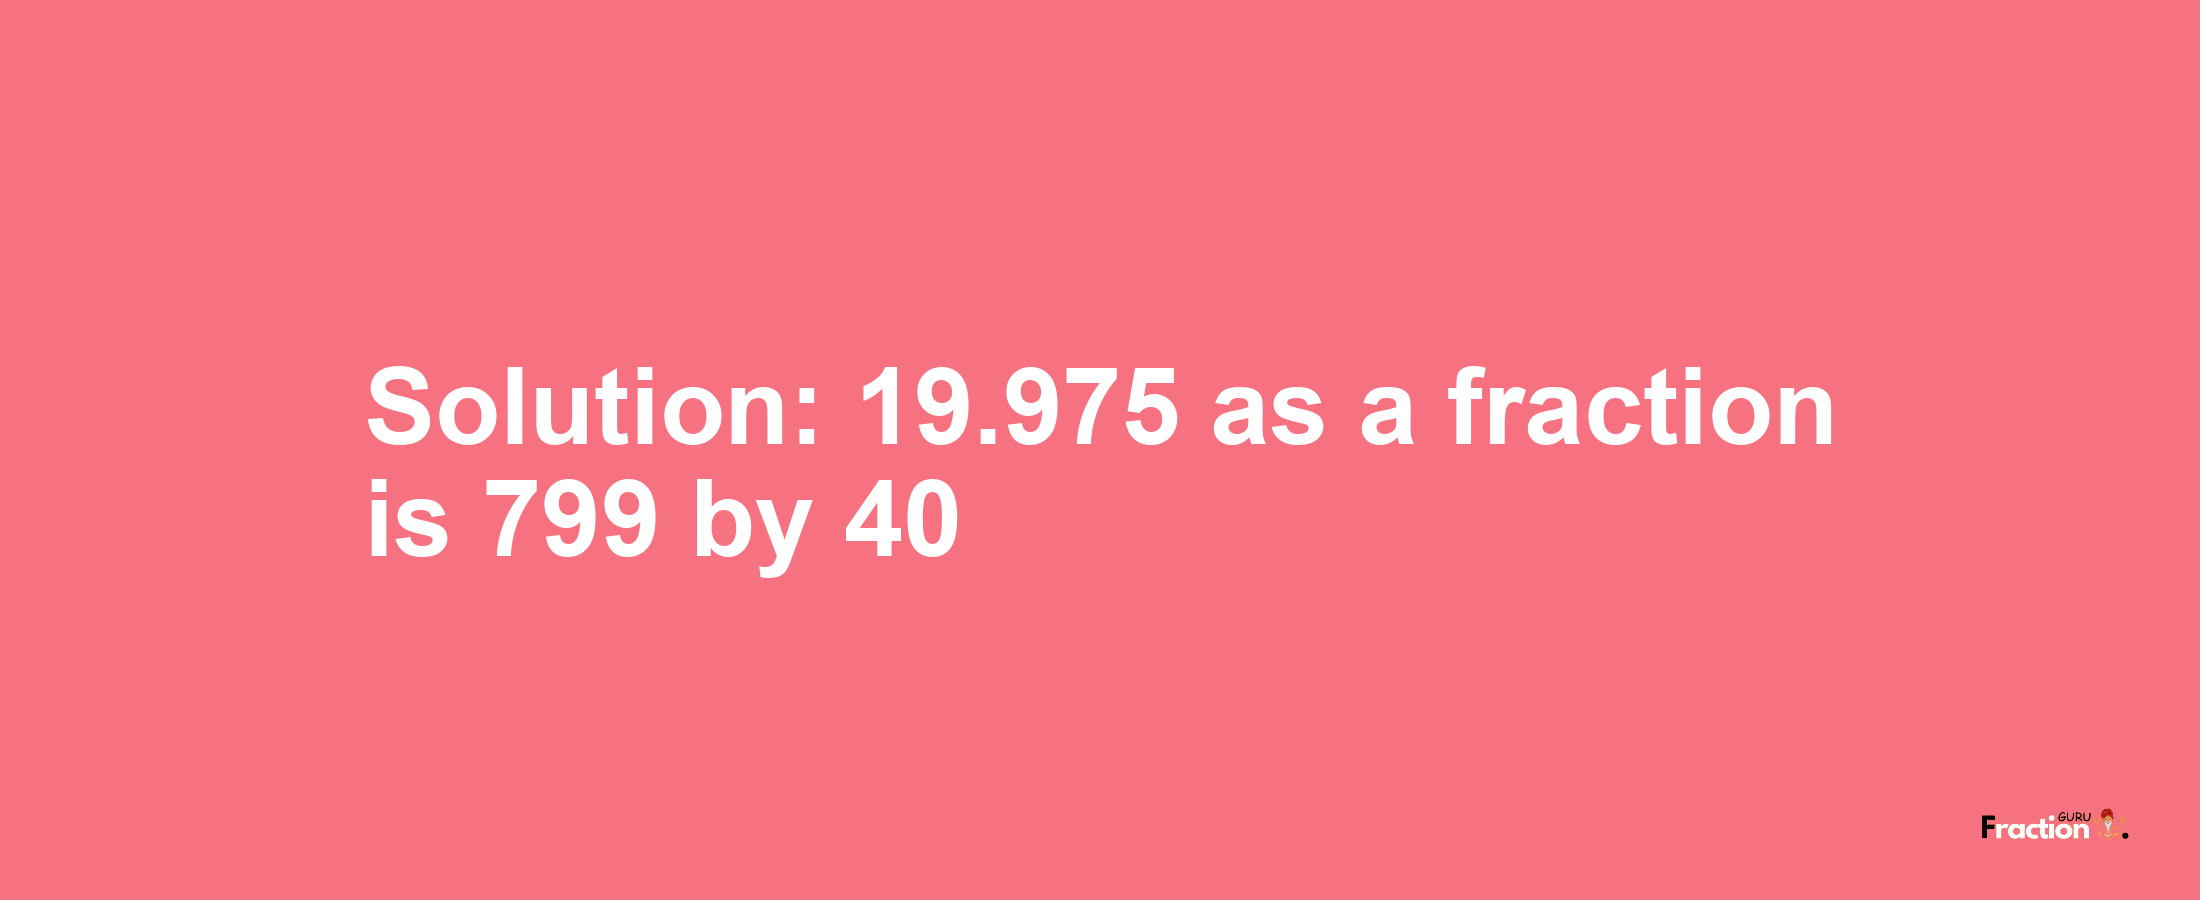 Solution:19.975 as a fraction is 799/40